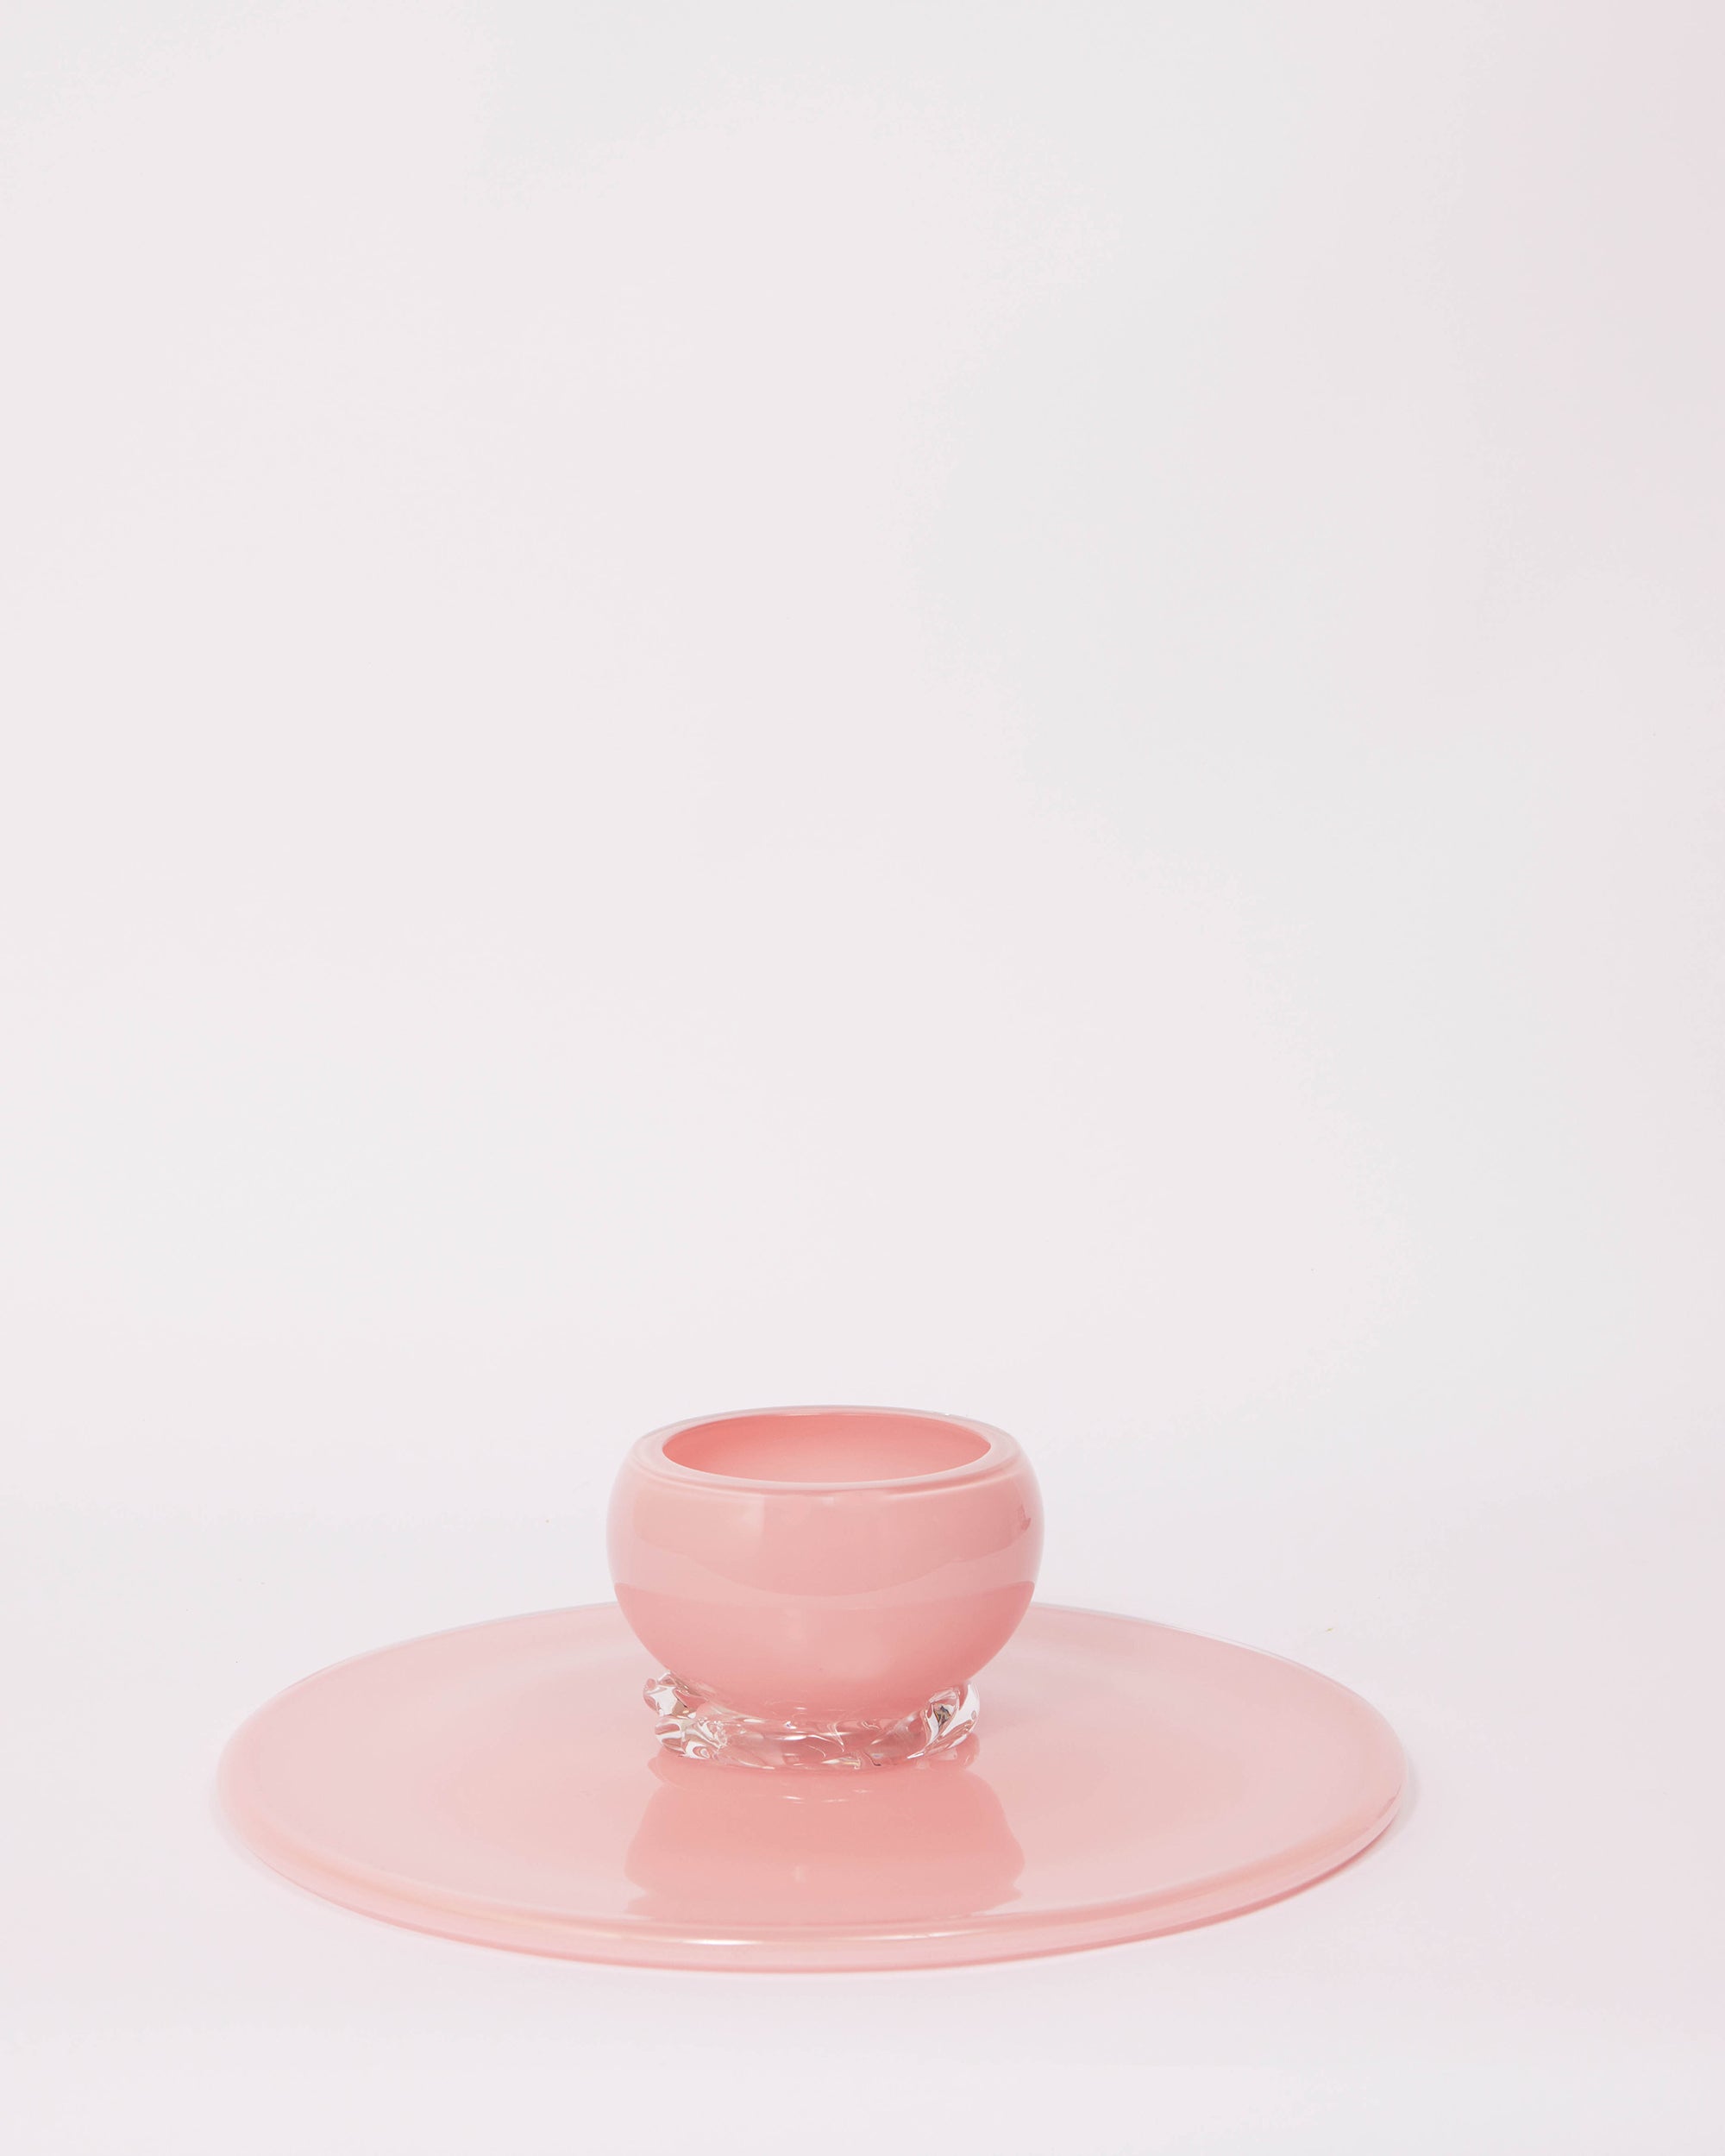 2 in 1 Cake Stand & Party Platter in Baby Pink